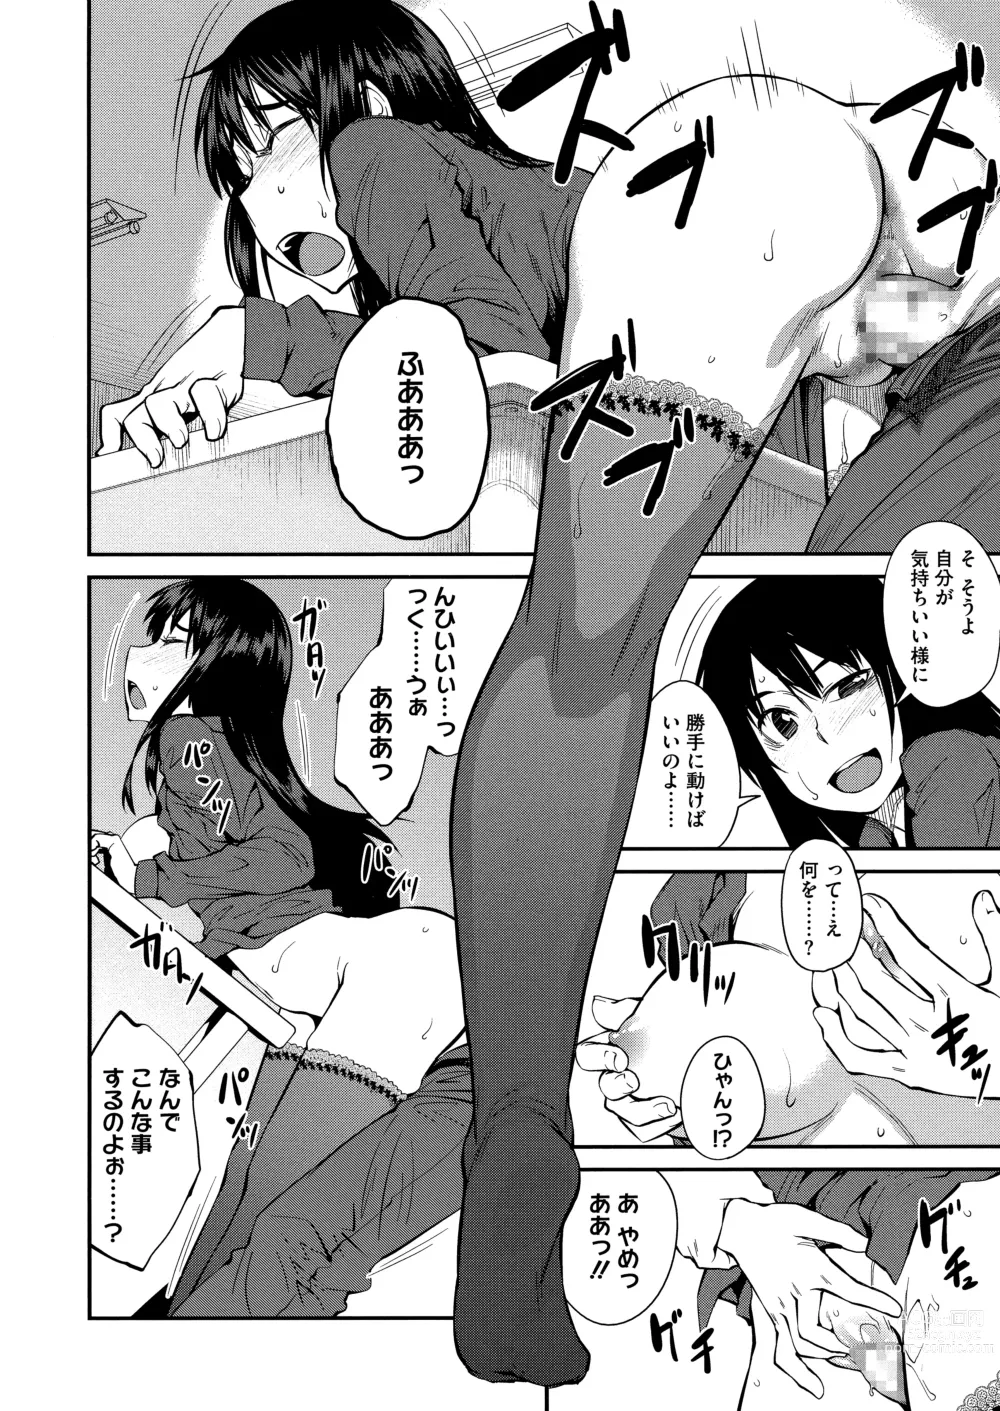 Page 18 of manga QUEENS GAME